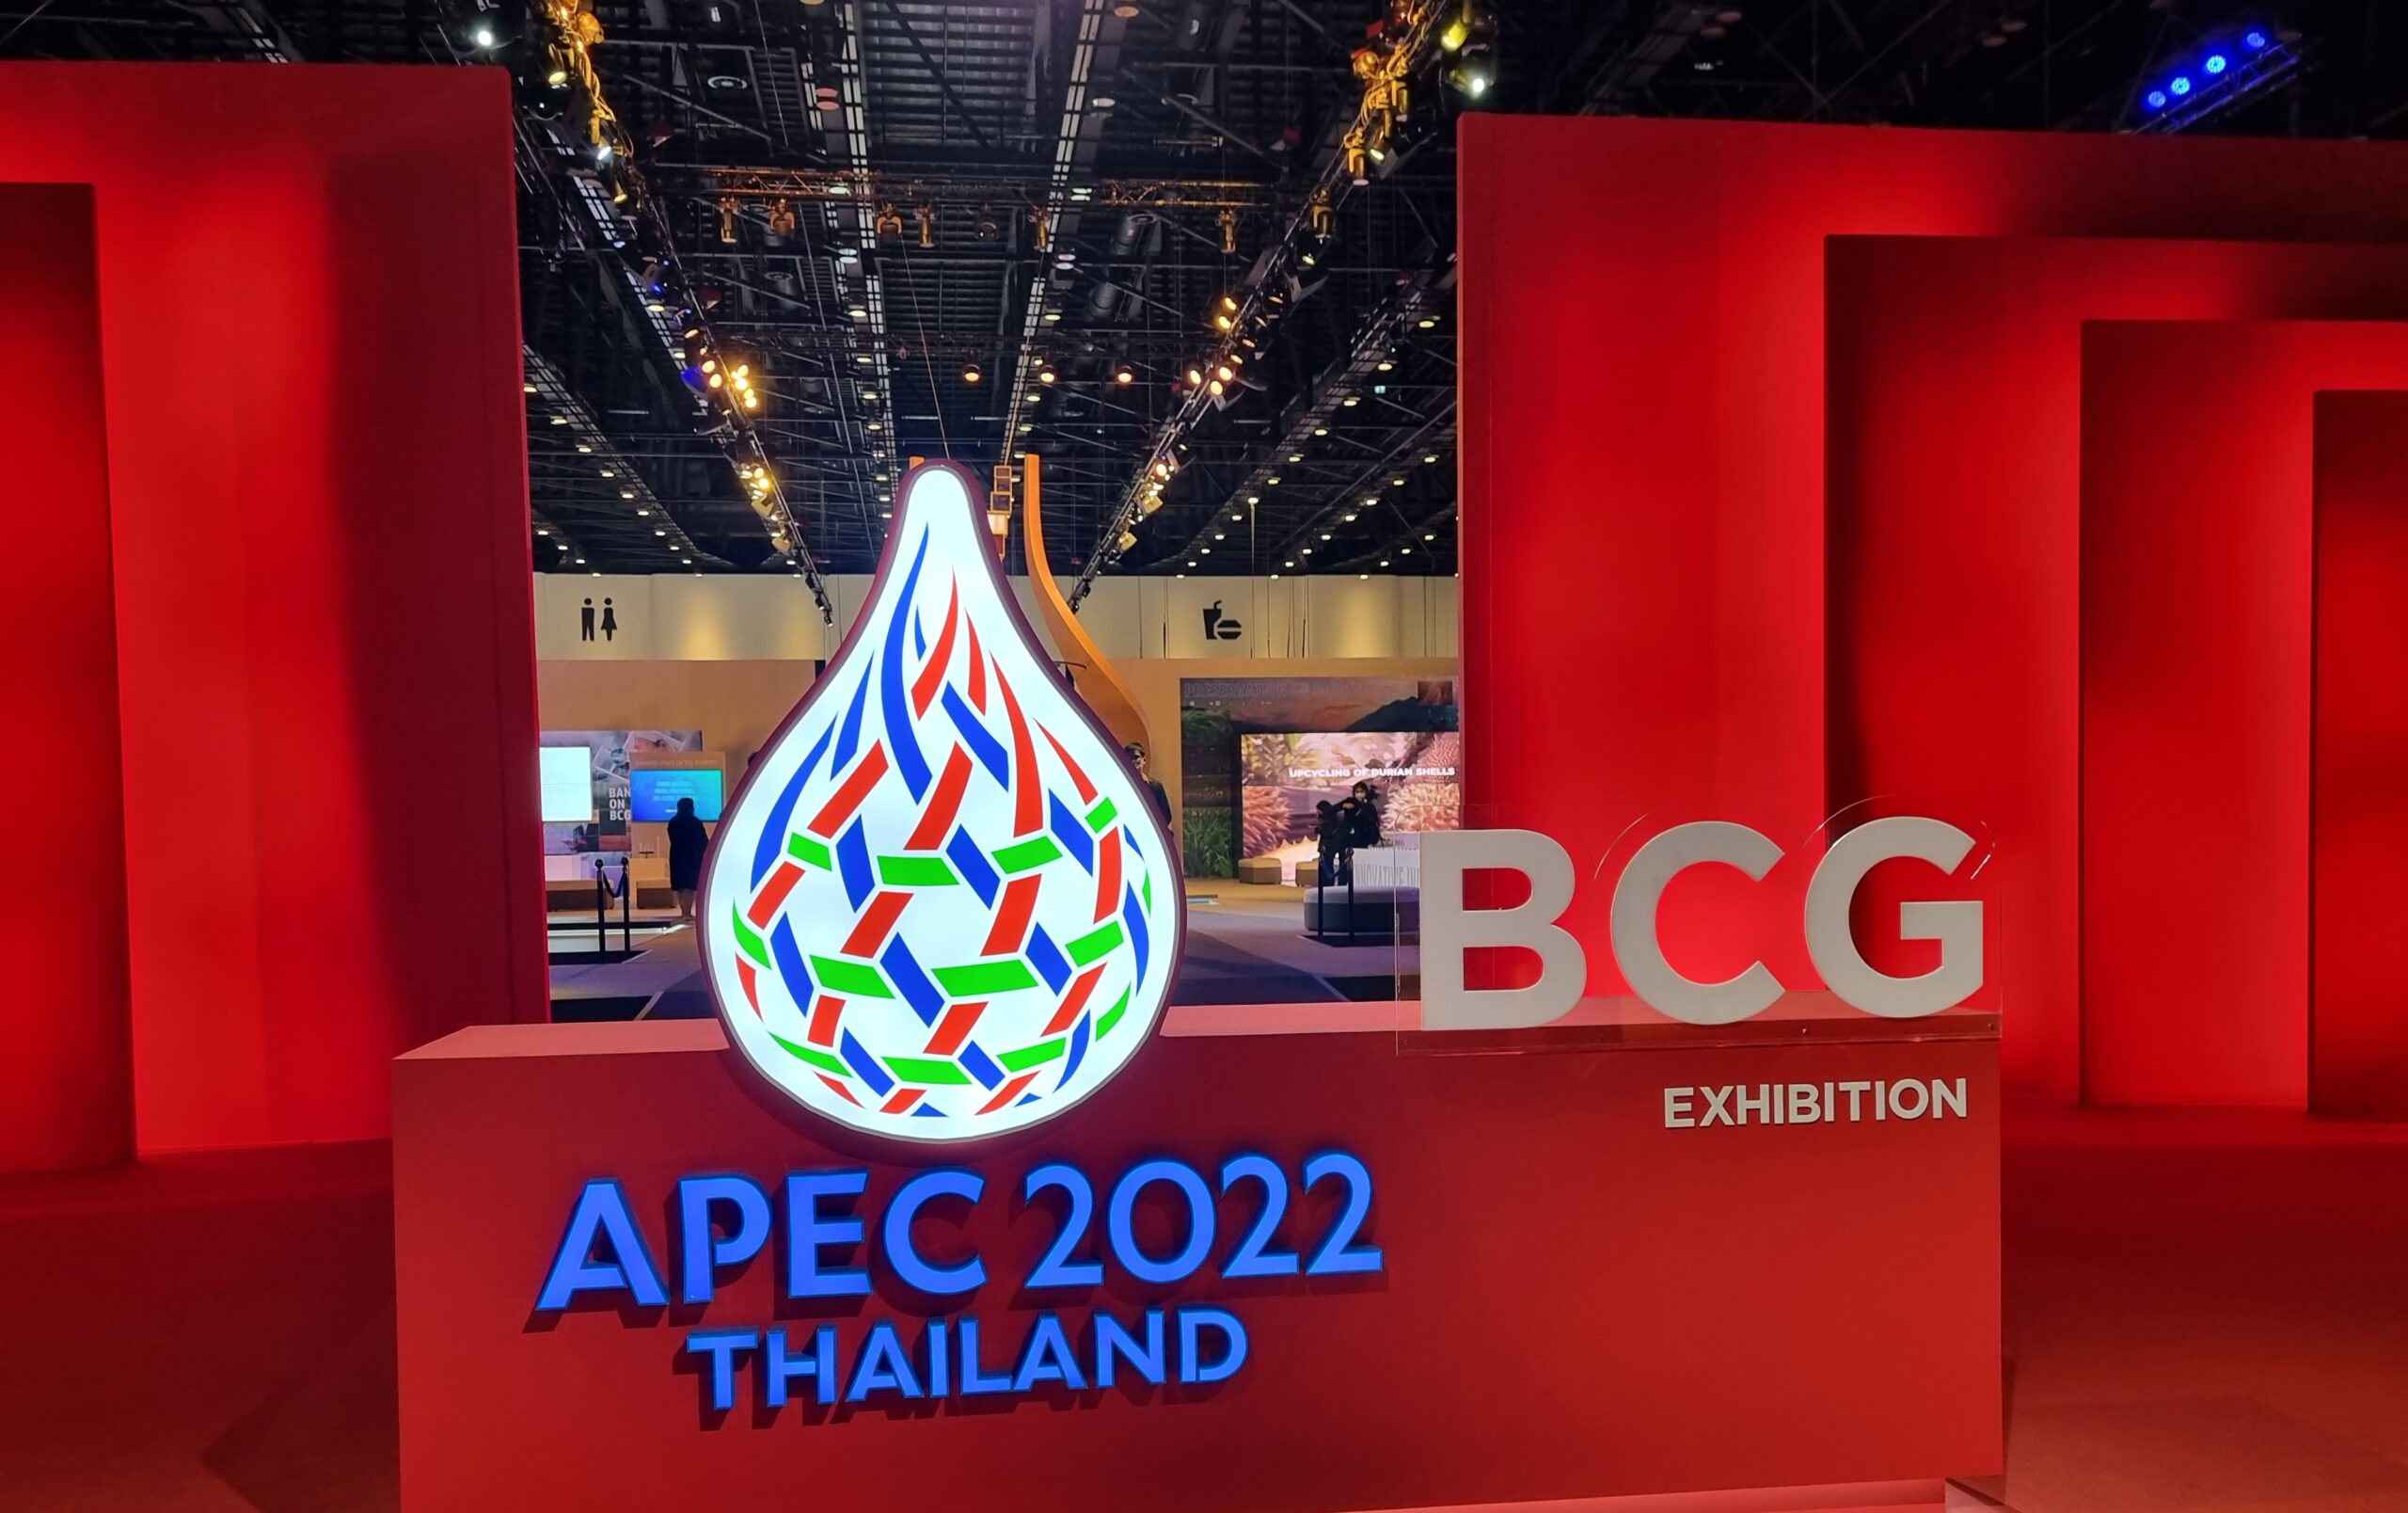 The ‘Bangkok Goals on the BCG Economy Model,’ are accepted and endorsed in the APEC 22 Declaration